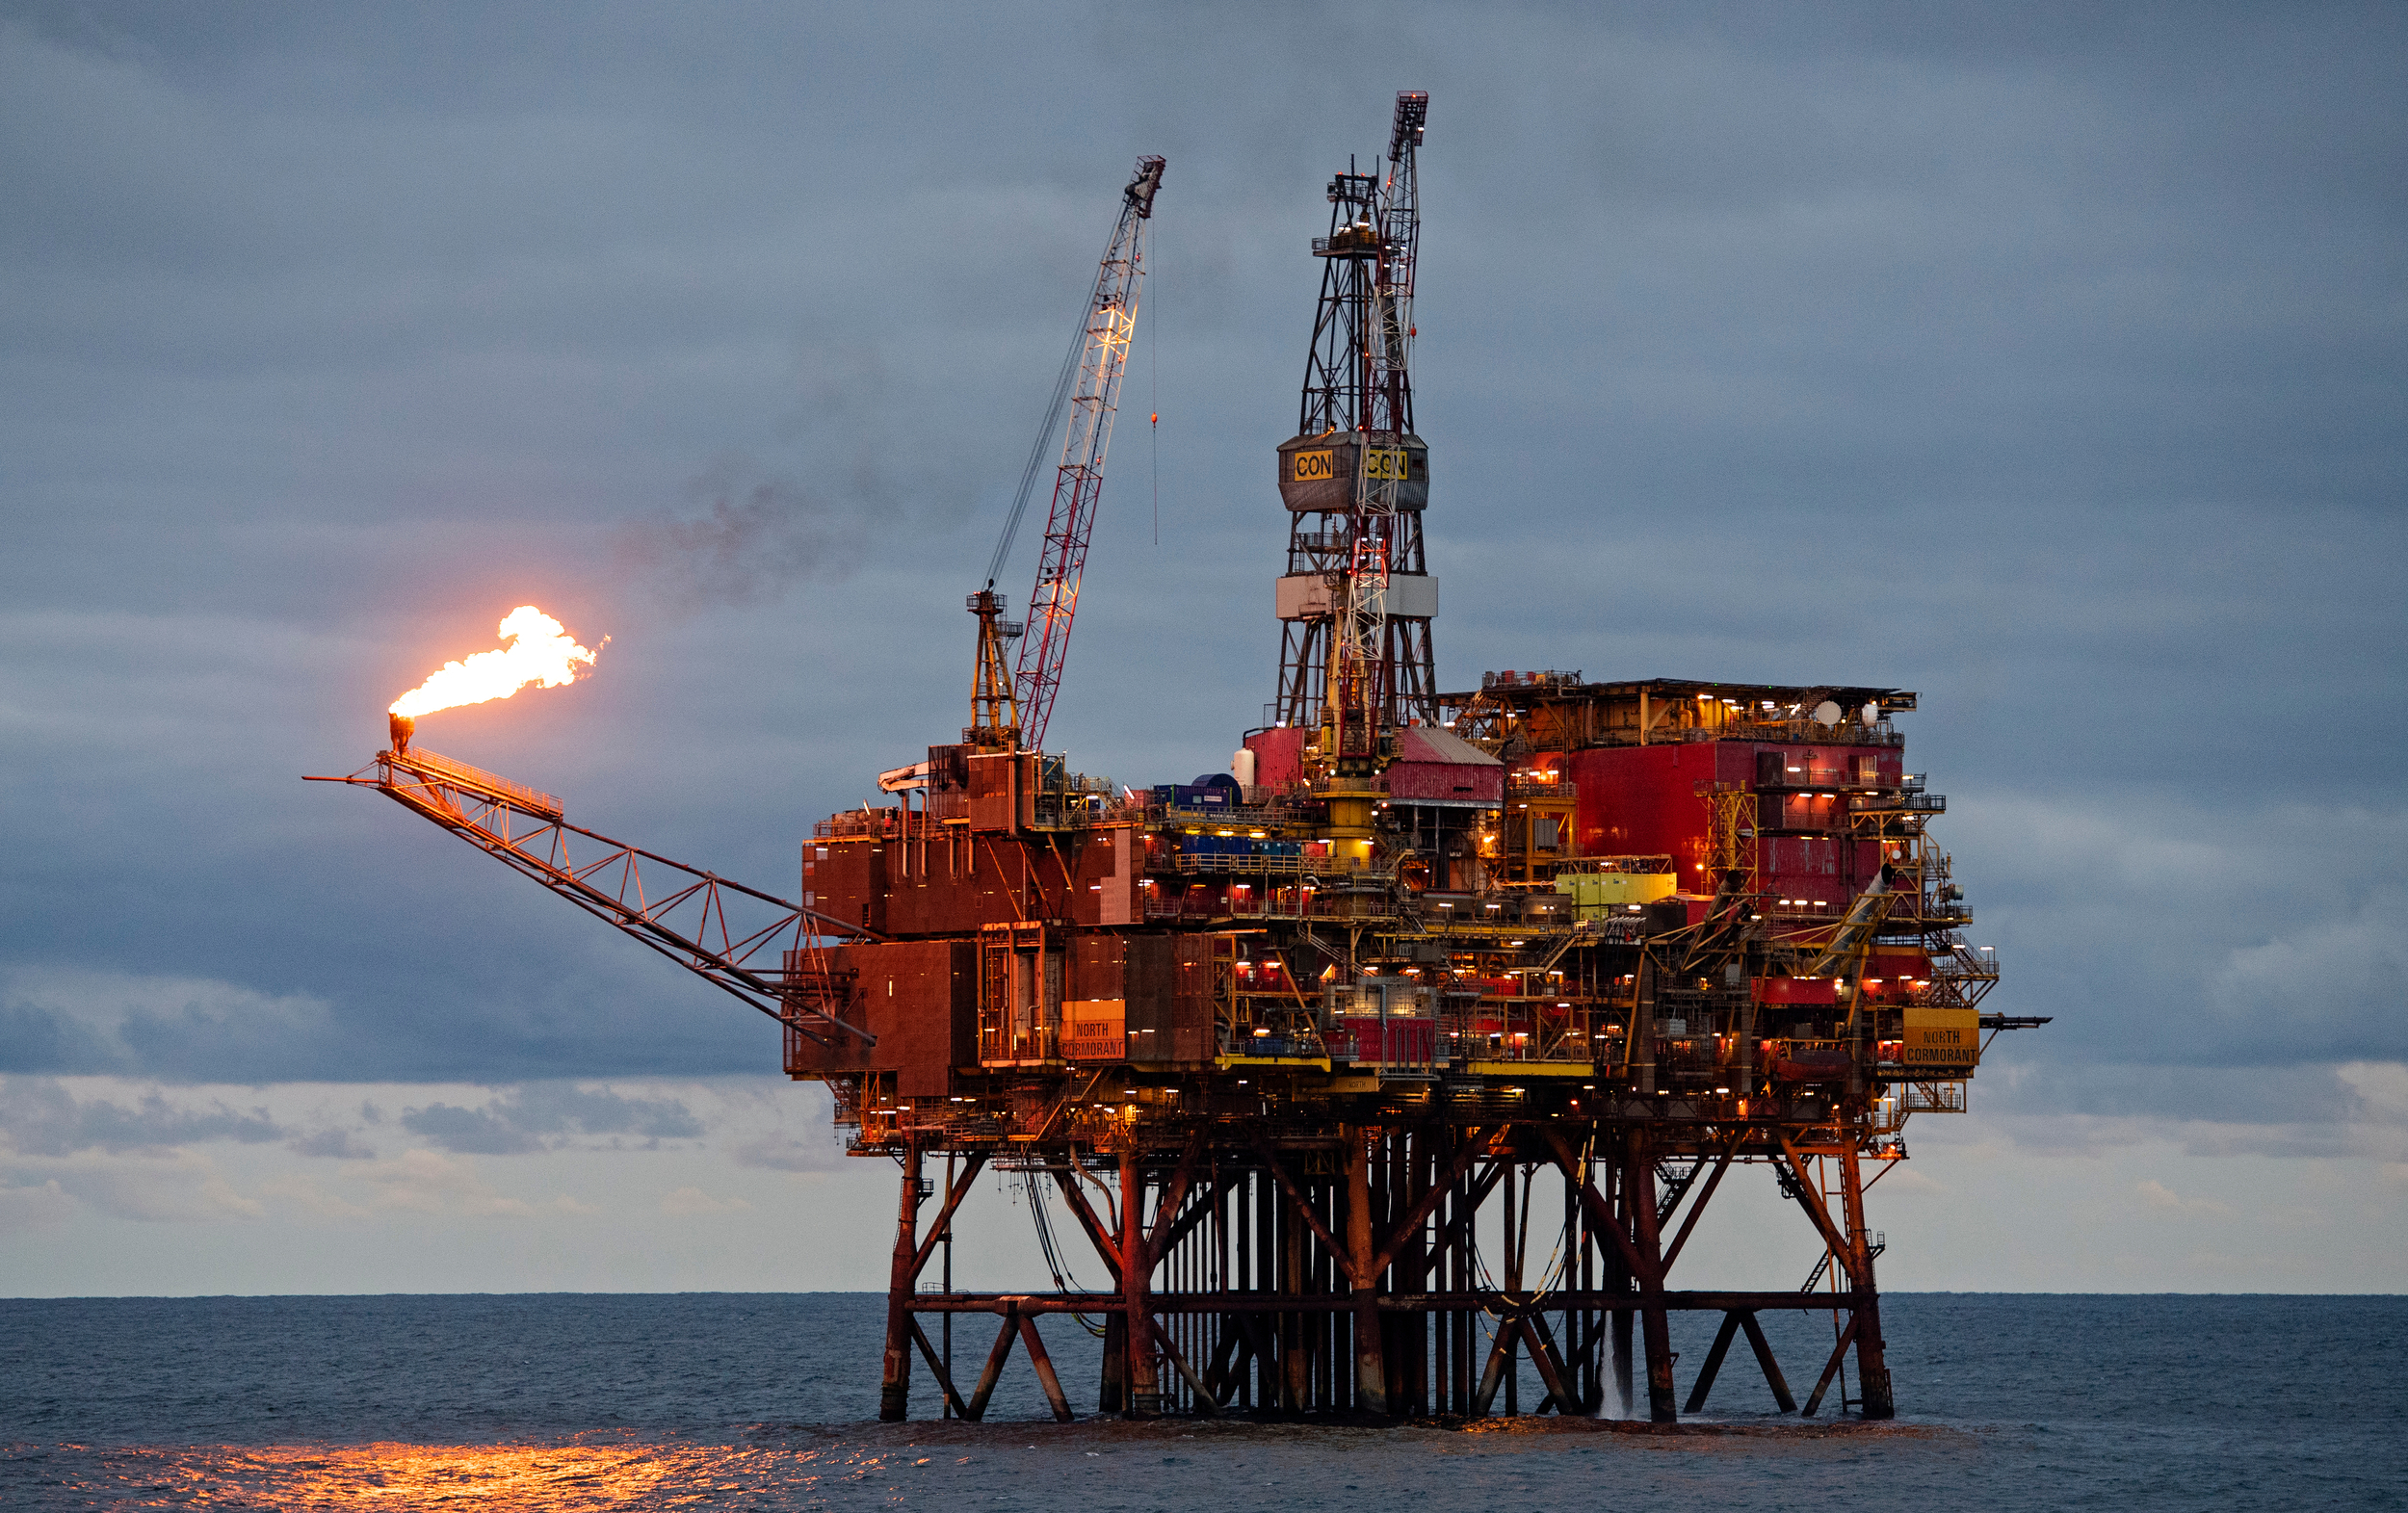 A flame bursts from the arm of a large oil rig in the sea